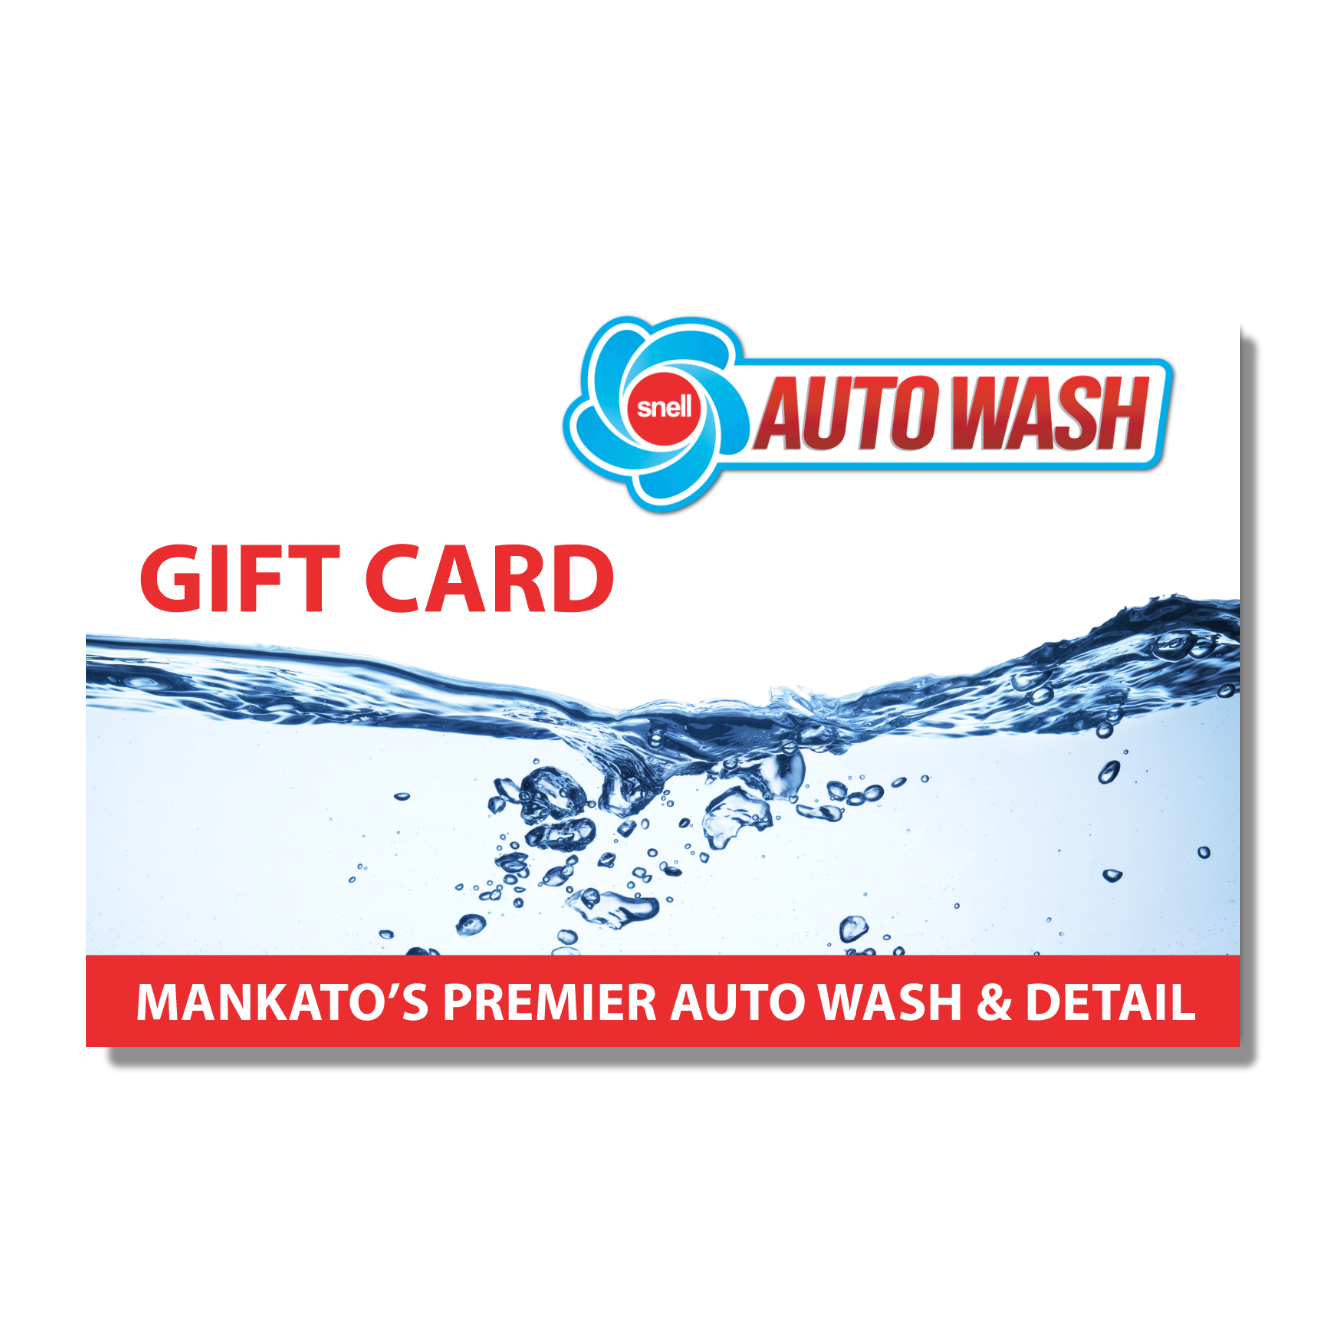 Snell Auto Wash Gift Card $200